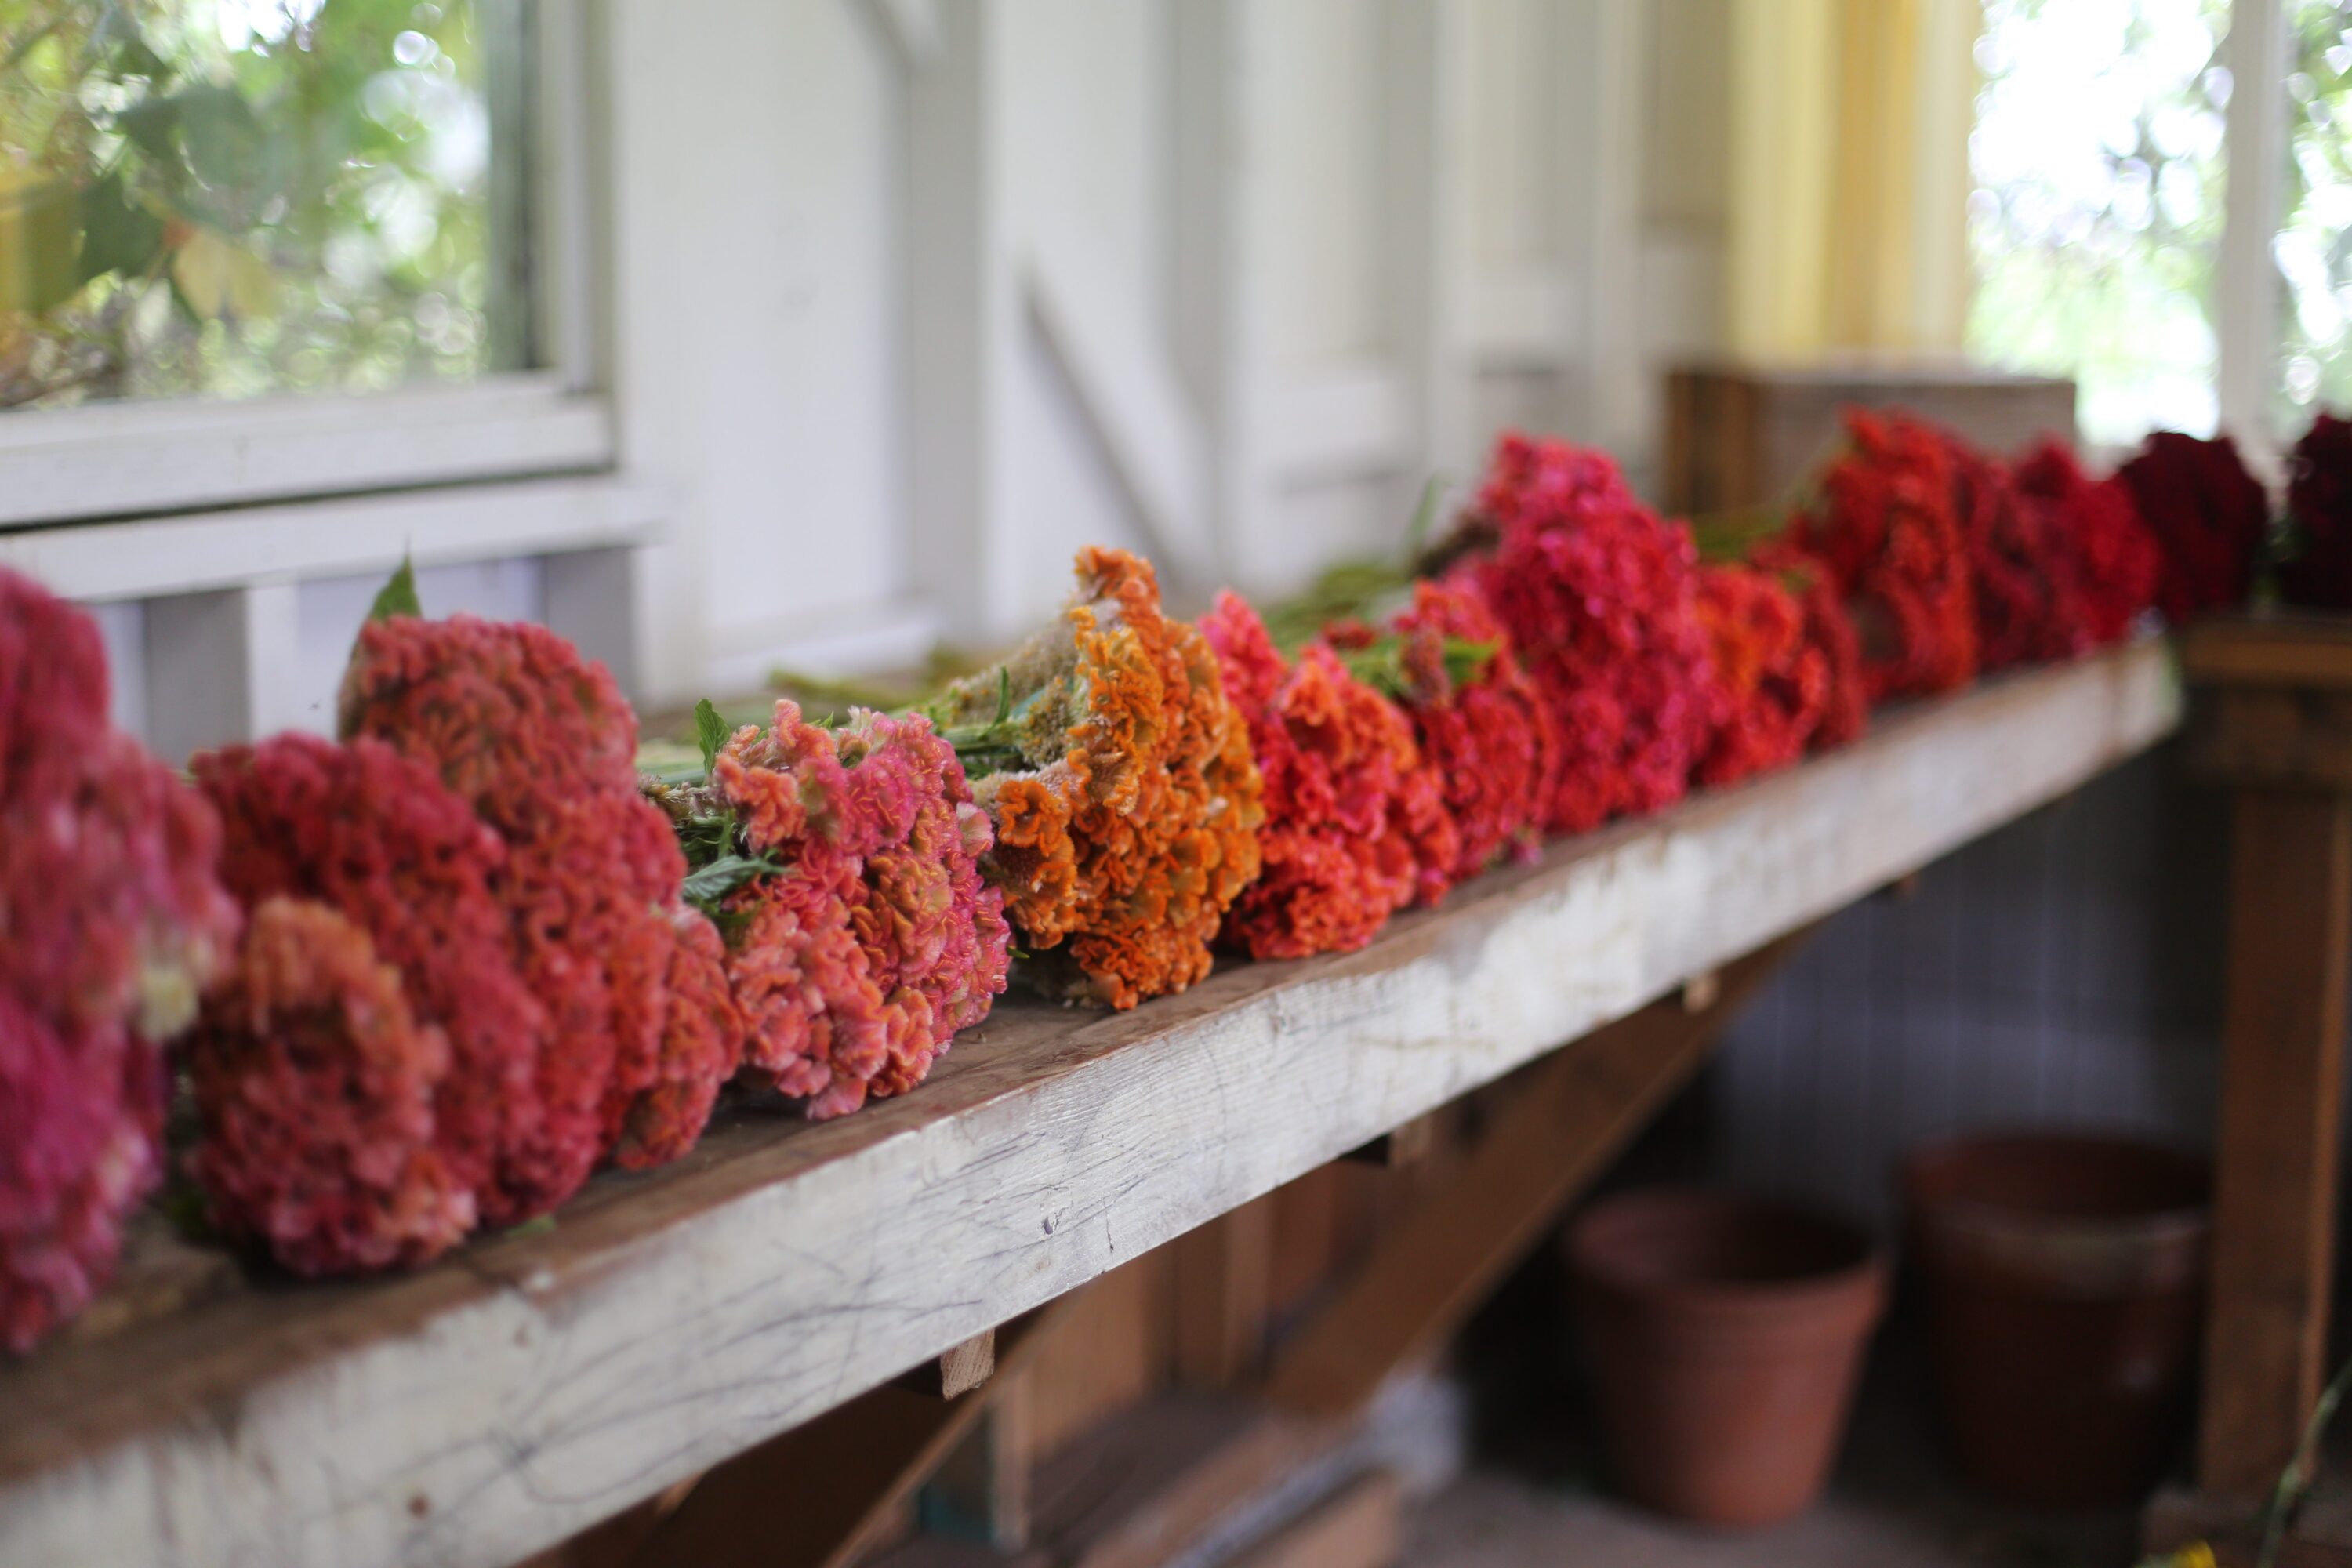 Bunches of celosia on a counter